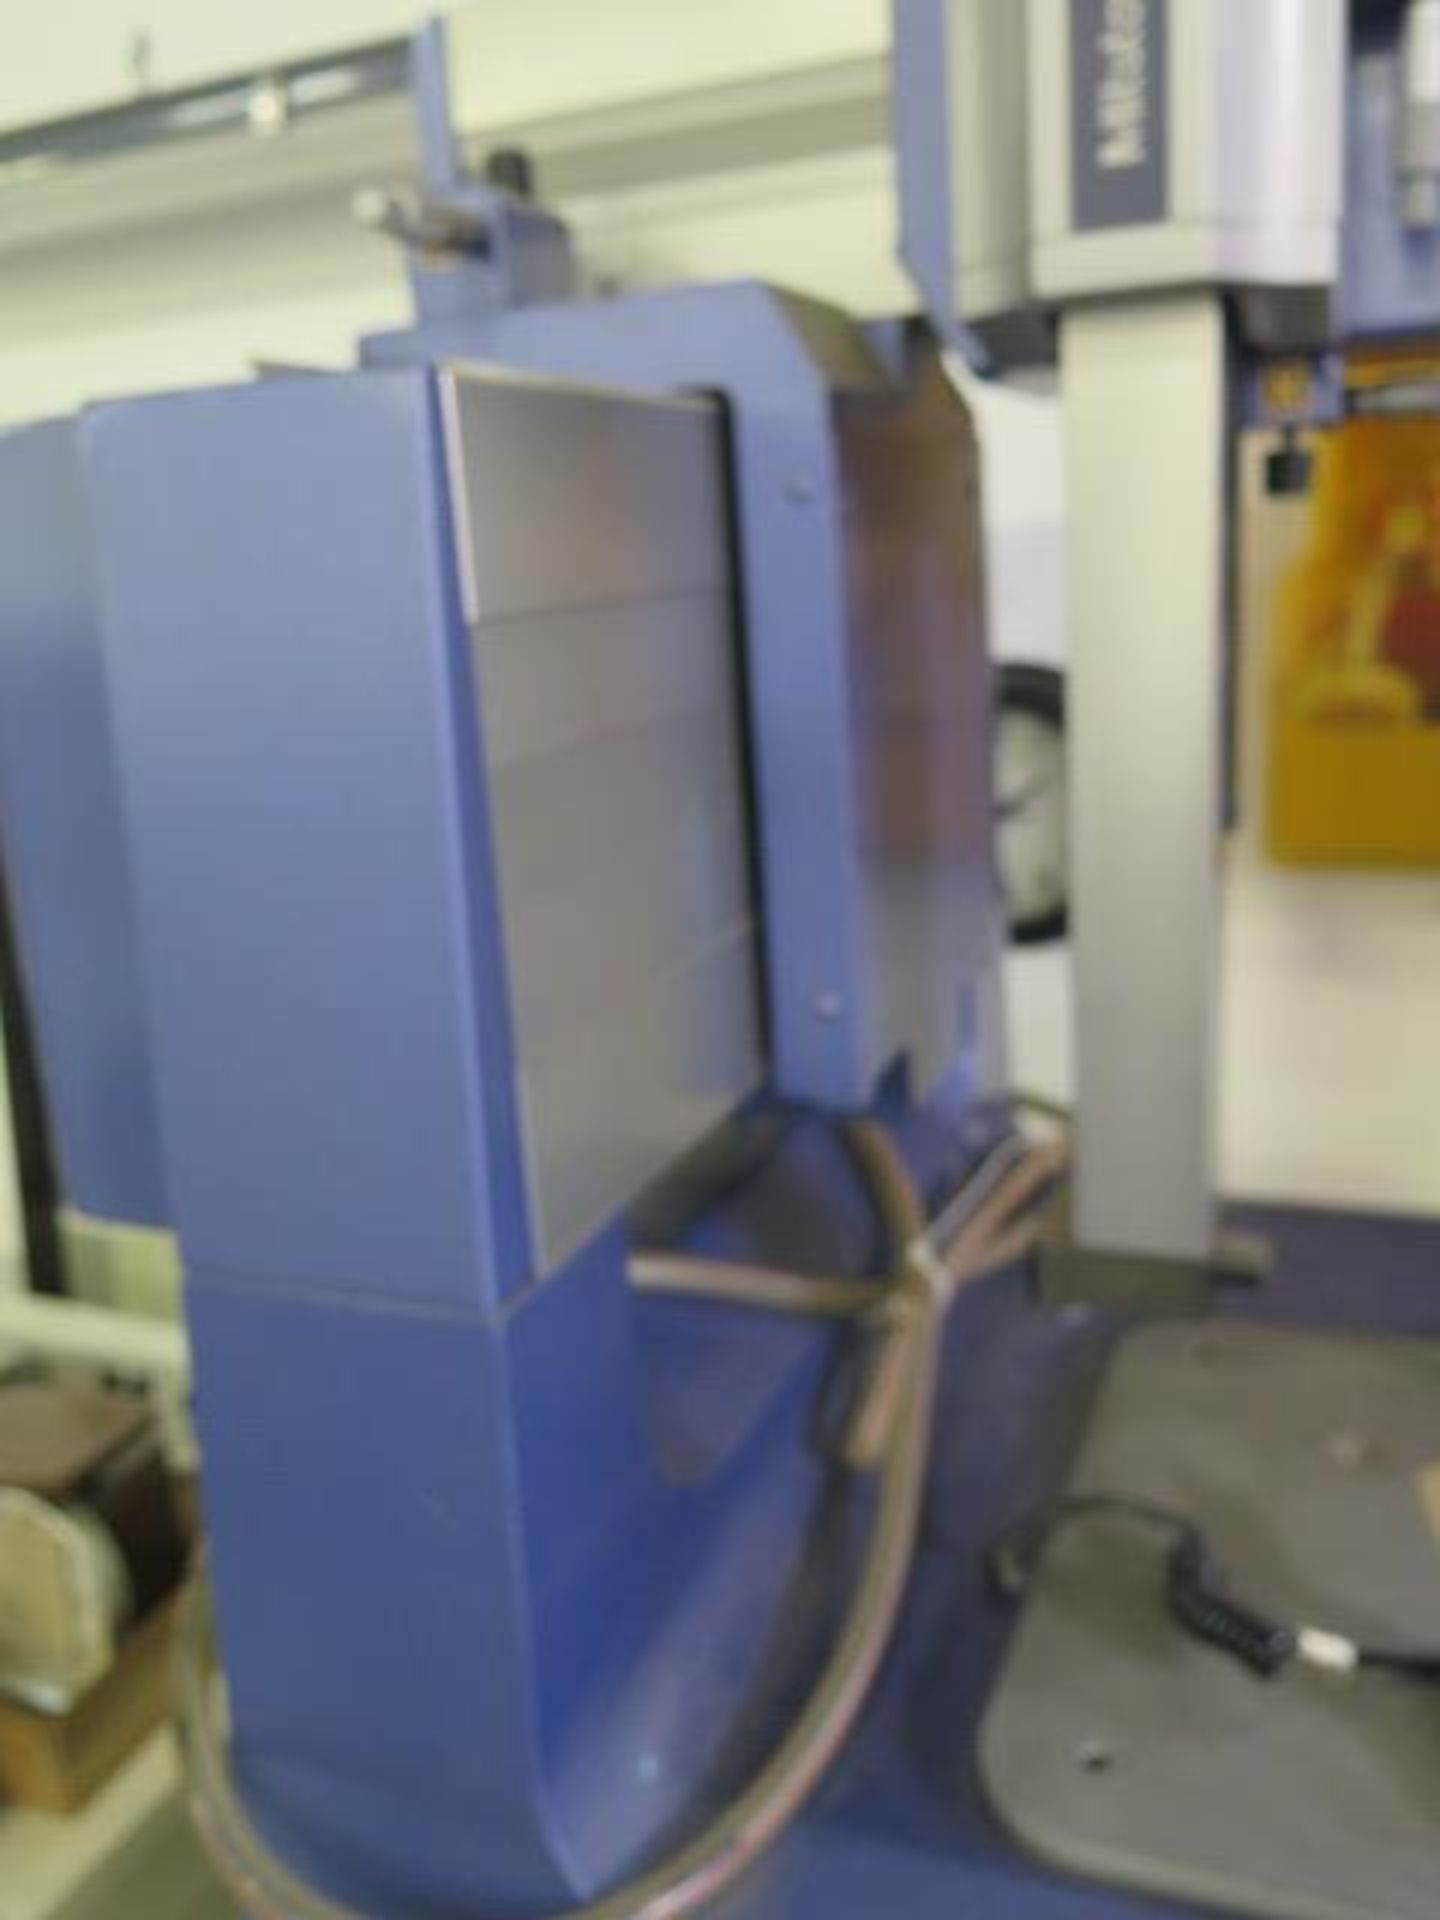 2010 Mitutoyo Measure 333 Manual CMM s/n BC000113 w/ Mitutoyo Programmable DRO, Renishaw, SOLD AS IS - Image 8 of 11